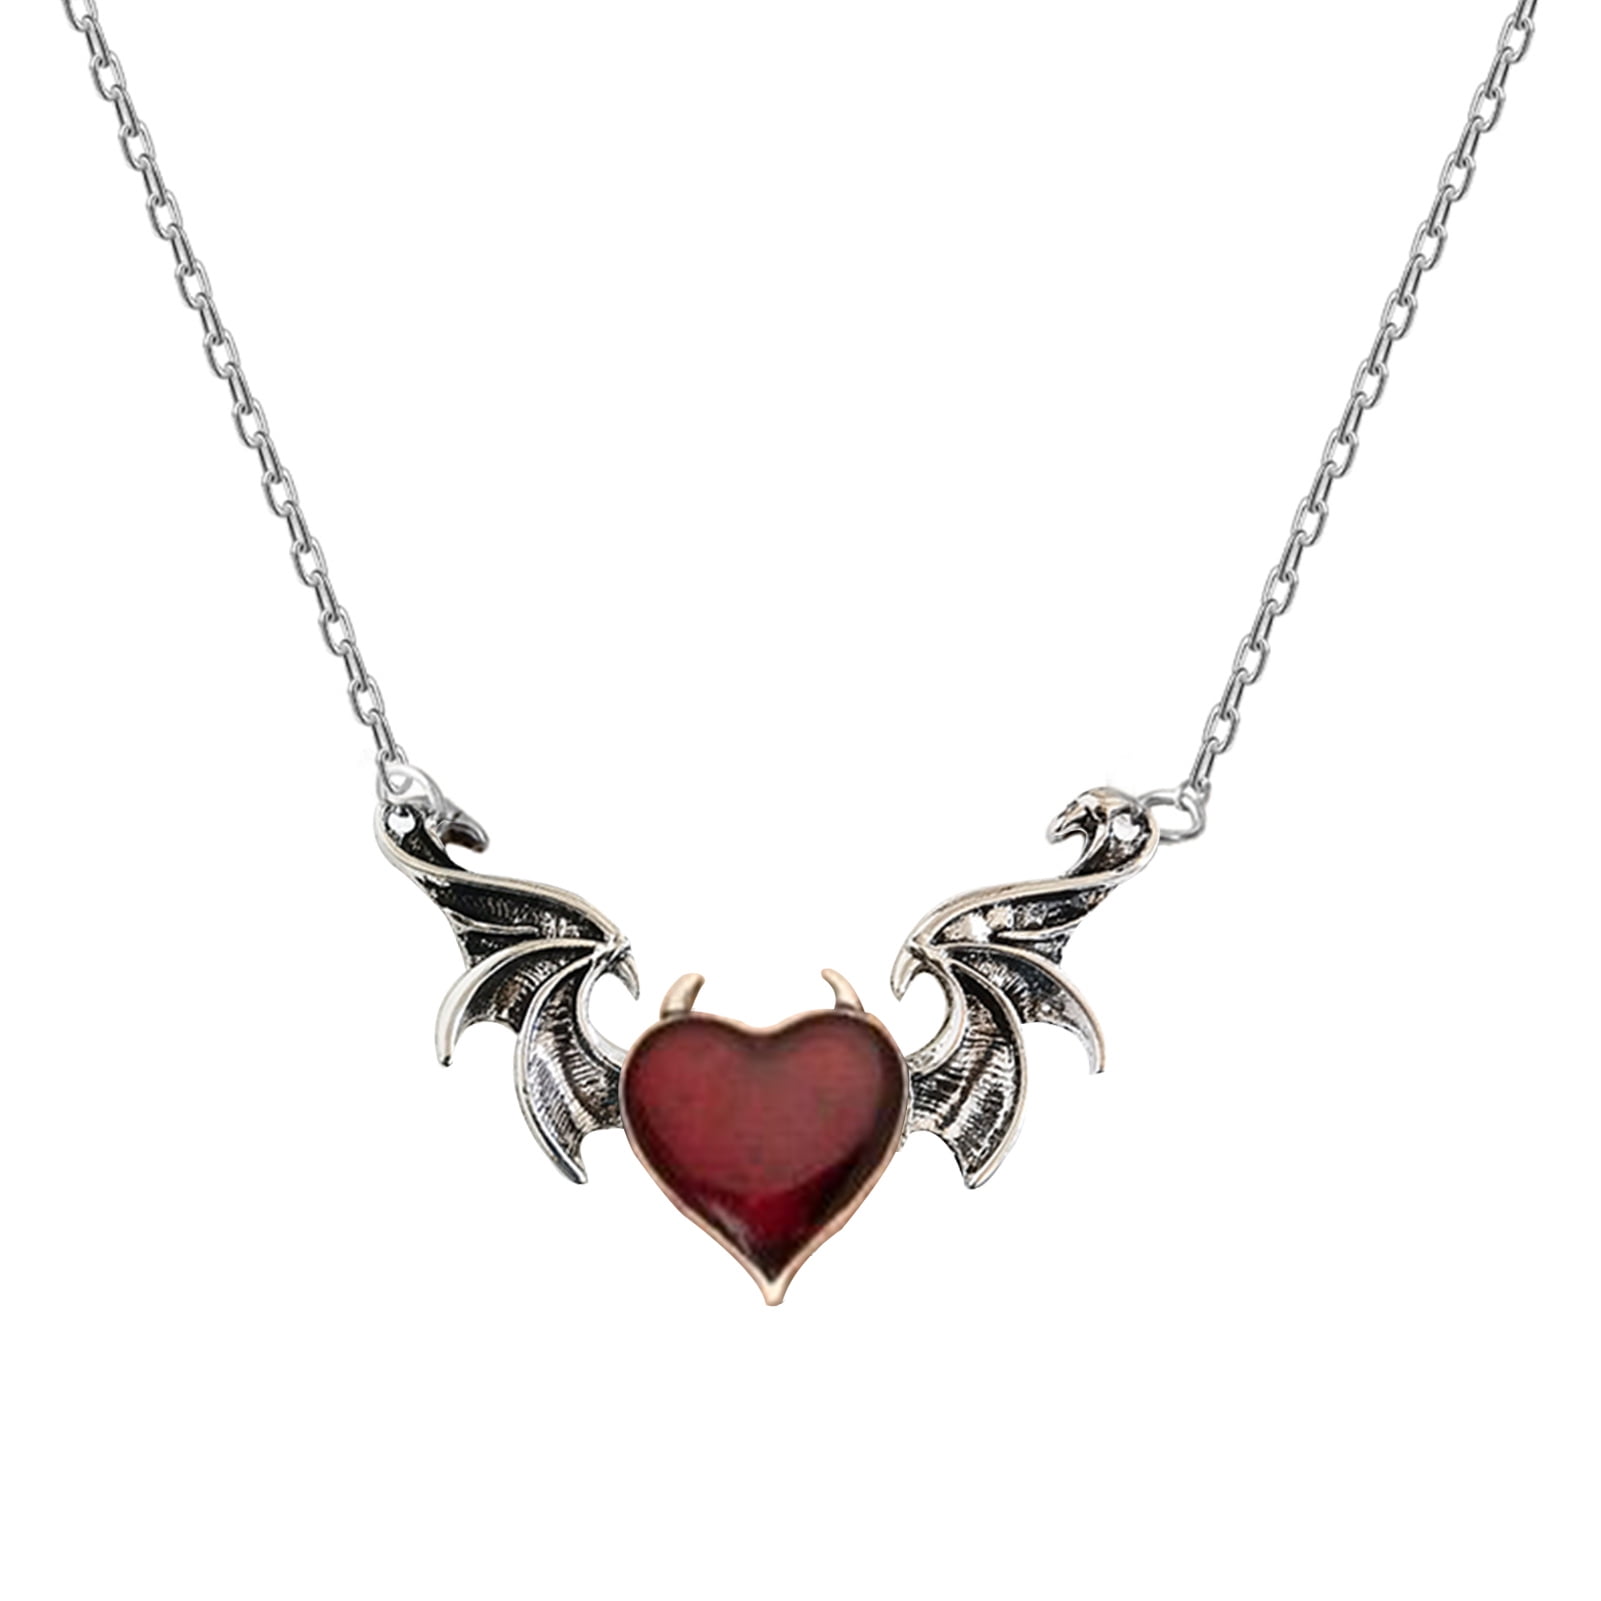 FUNKY VINTAGE SILVER LOVE HEART PENDANT NECKLACE VALENTINE GIFT CUTE SWEET CHARM 